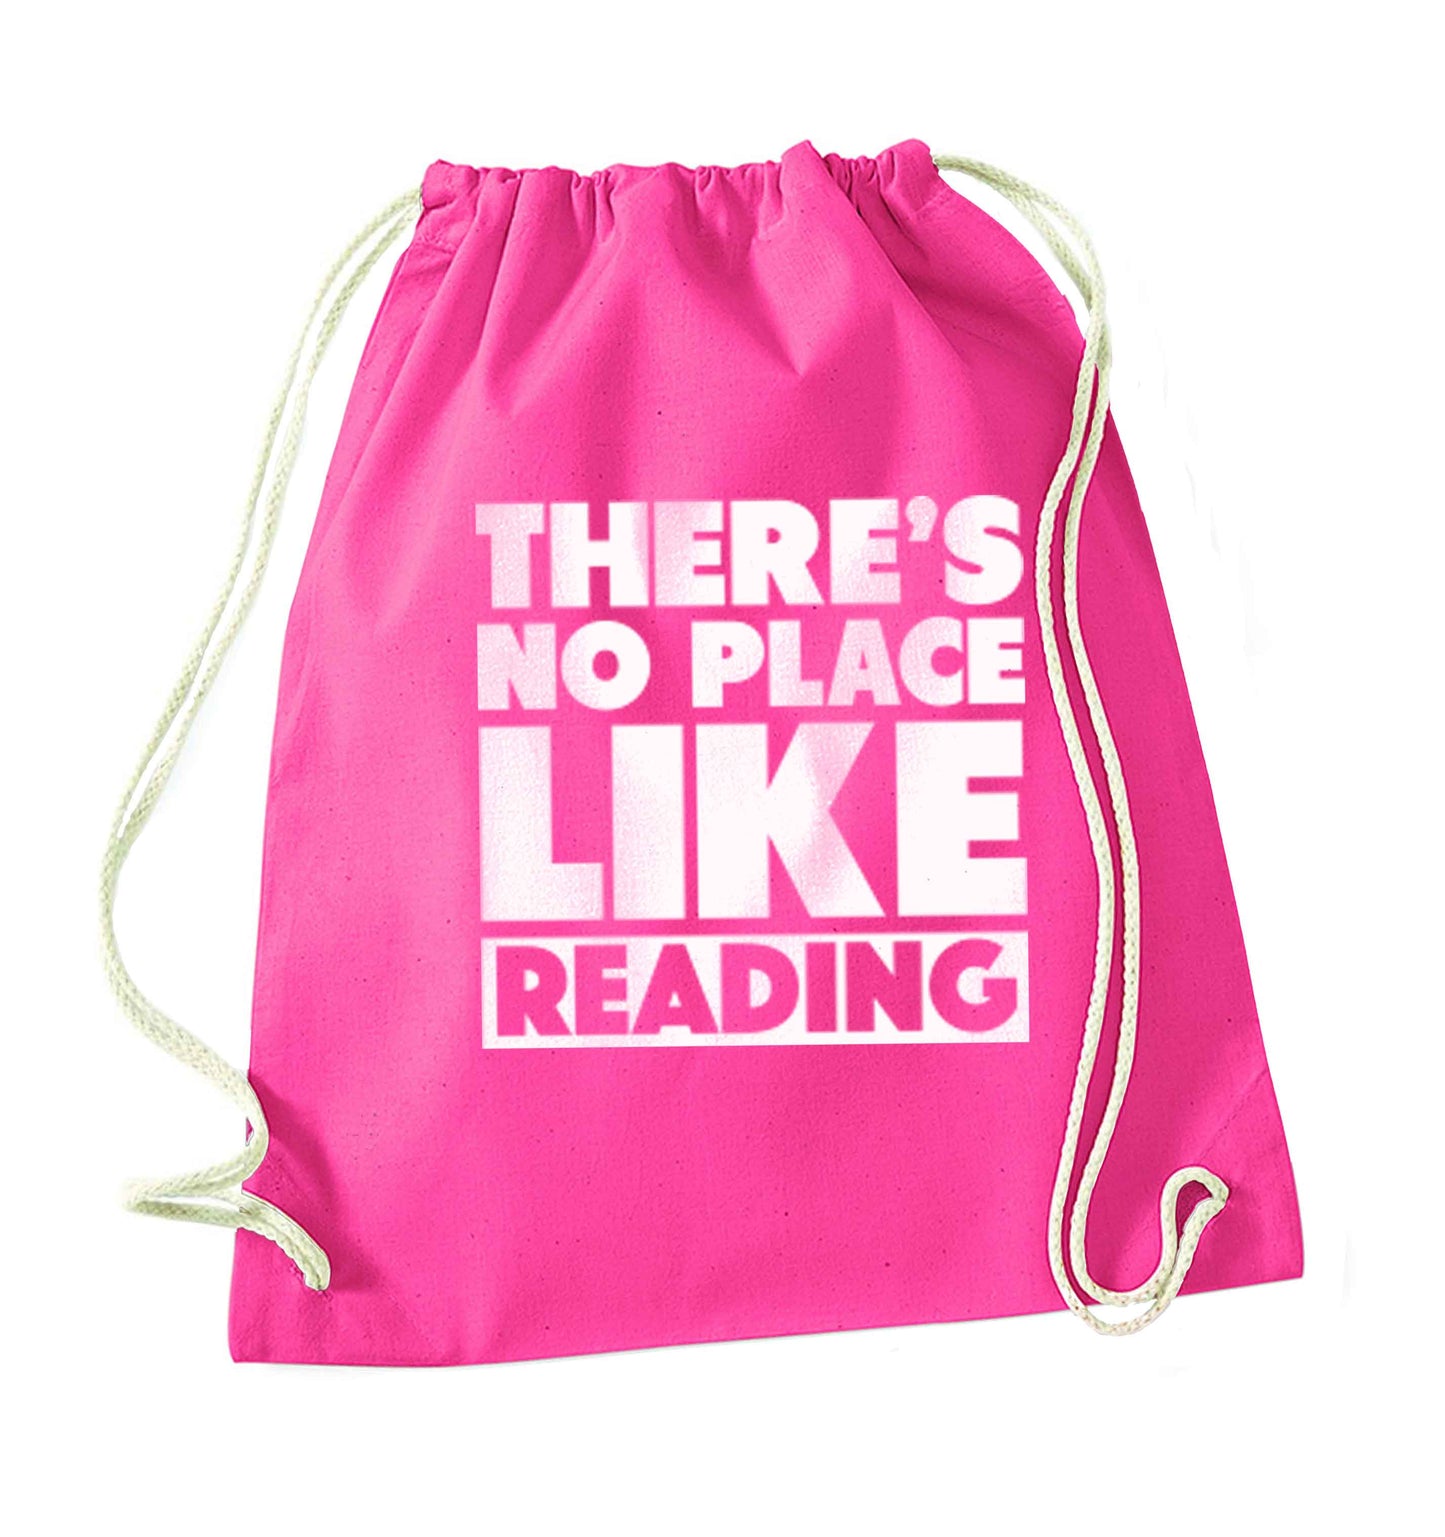 There's no place like Readingpink drawstring bag